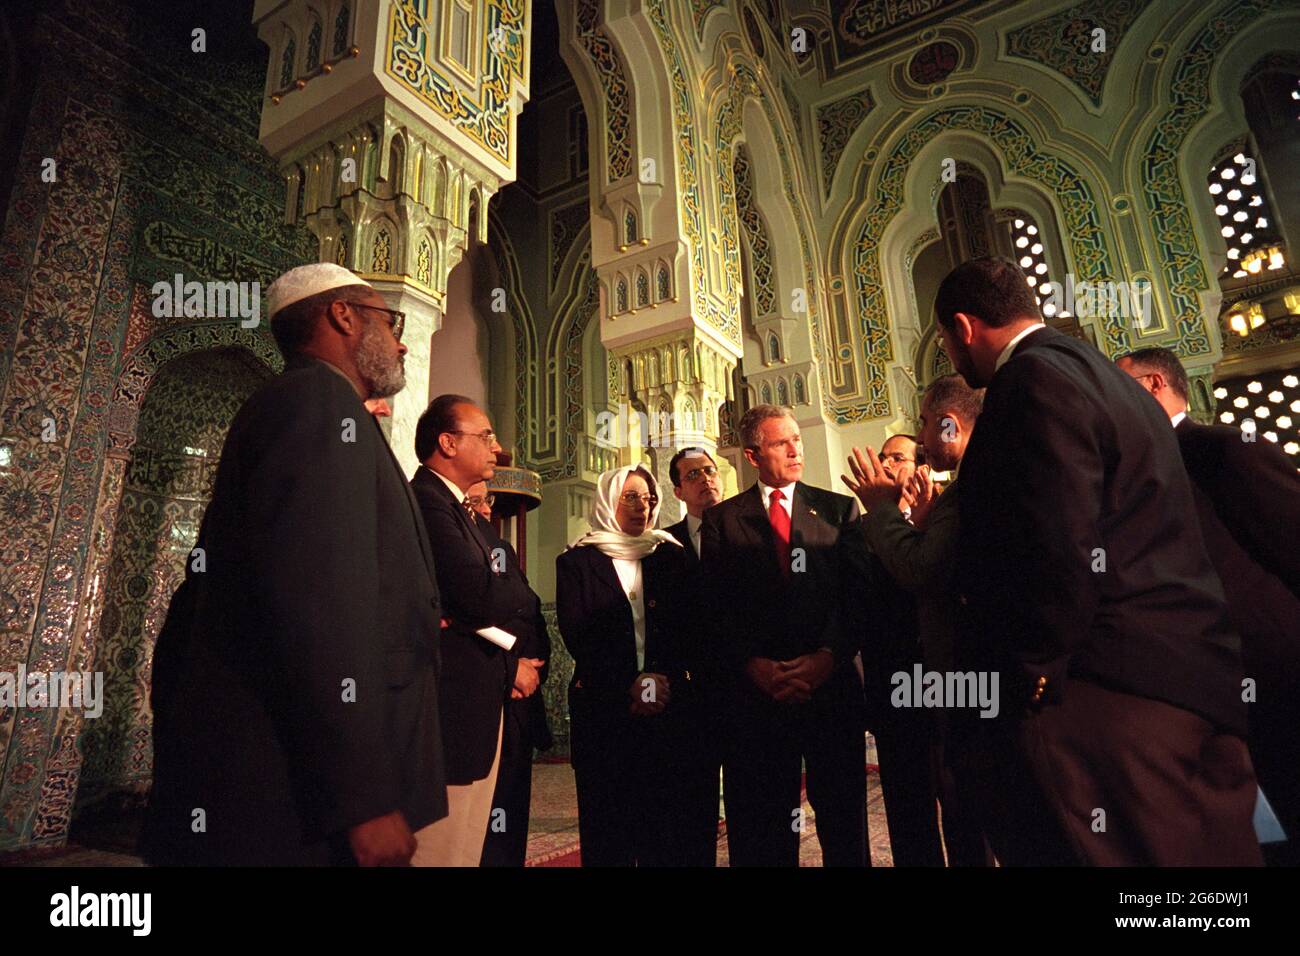 President George W. Bush talks with community leaders Monday, Sept. 17, 2001, after touring the Islamic Center of Washington, D.C.  Photo by Paul Morse, Courtesy of the George W. Bush Presidential Library Stock Photo